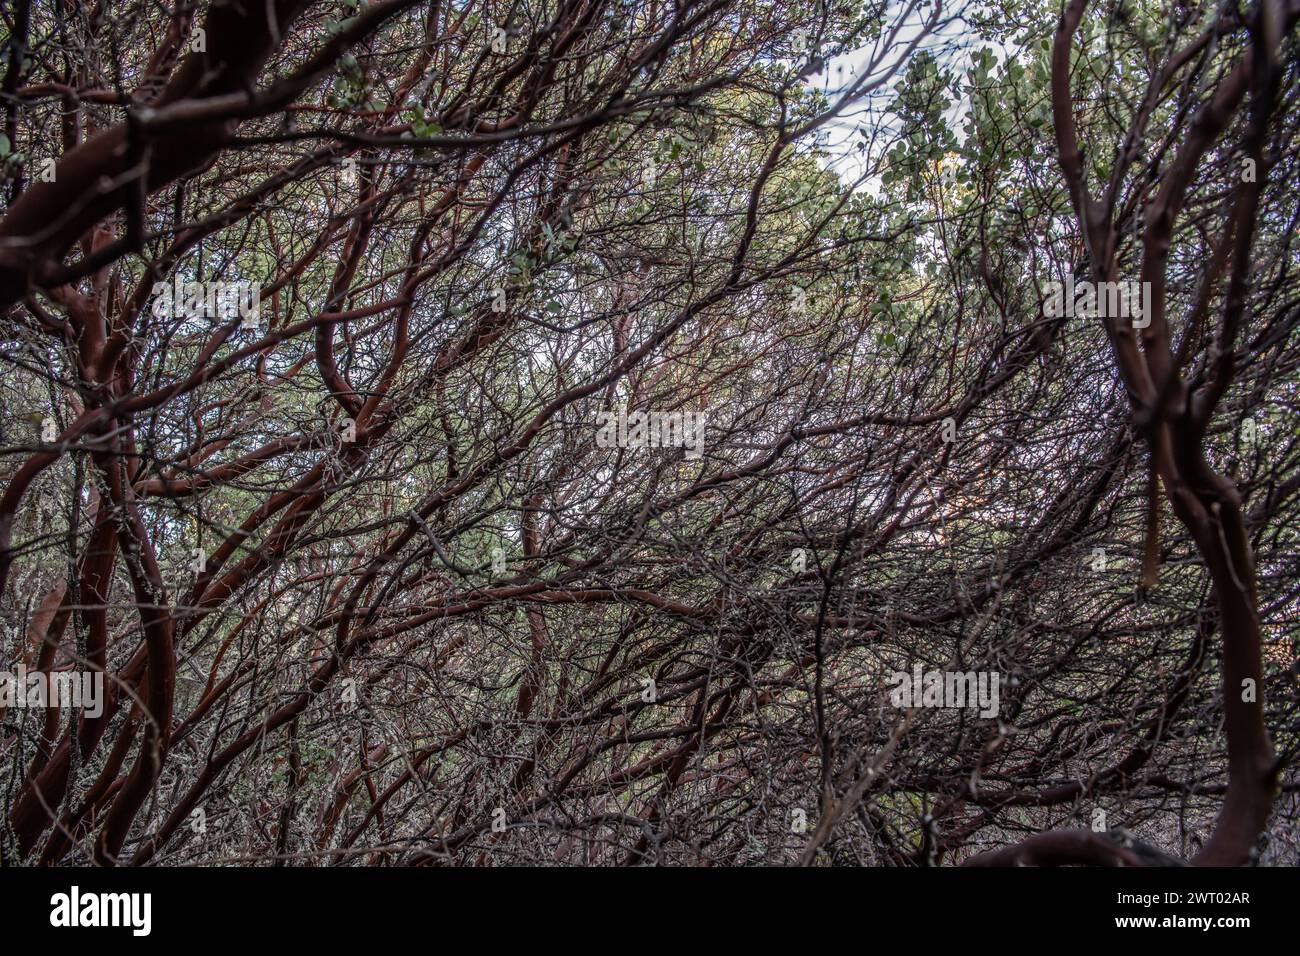 Arbutus menziesii or Pacific madrone forest understory in California. Stock Photo